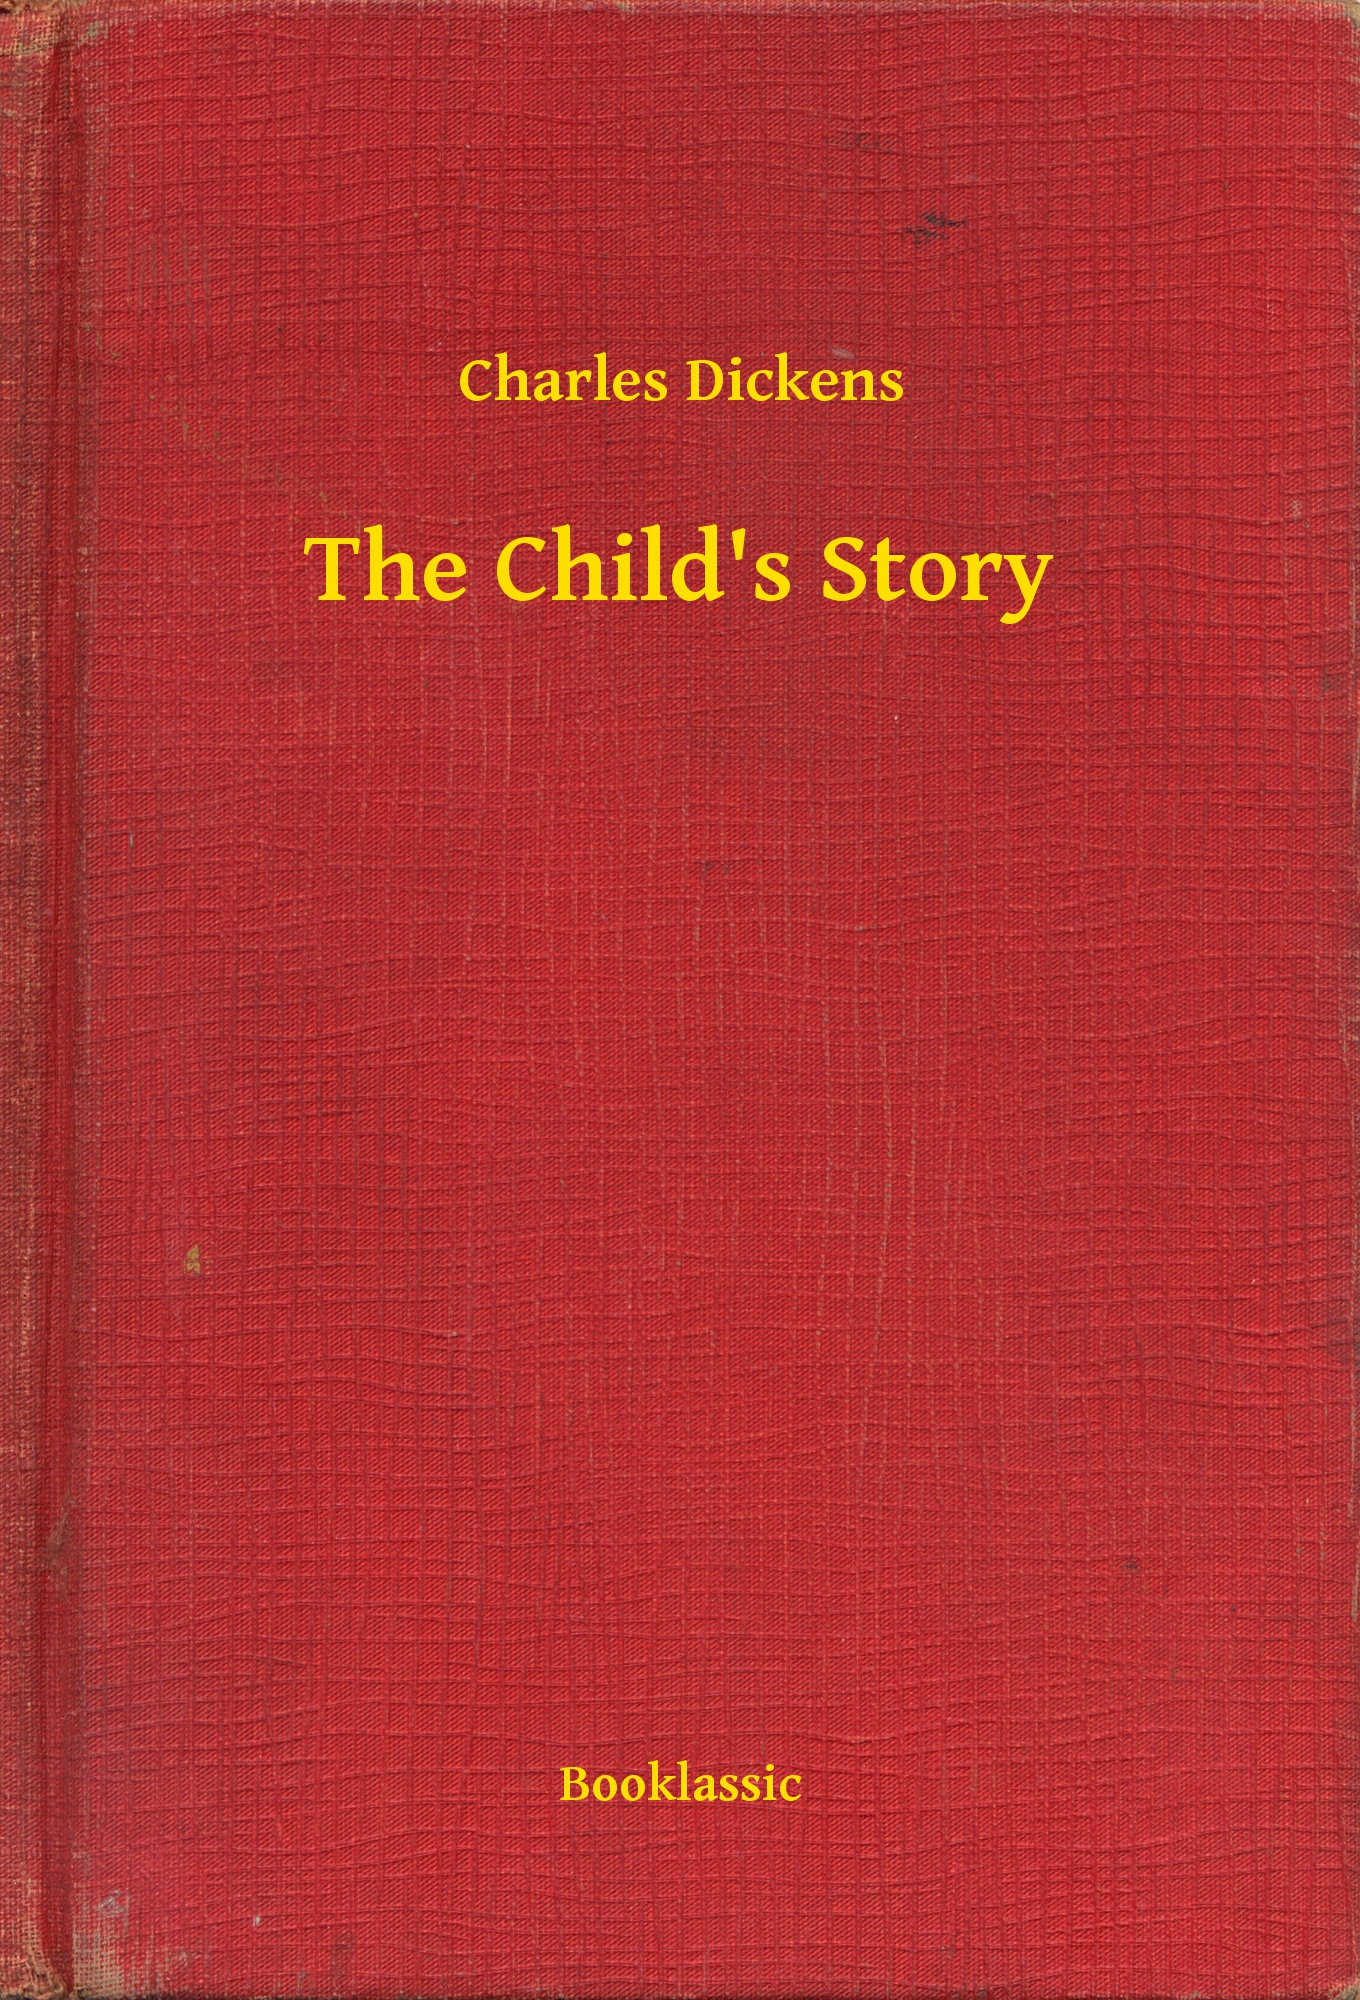 The Child"s Story